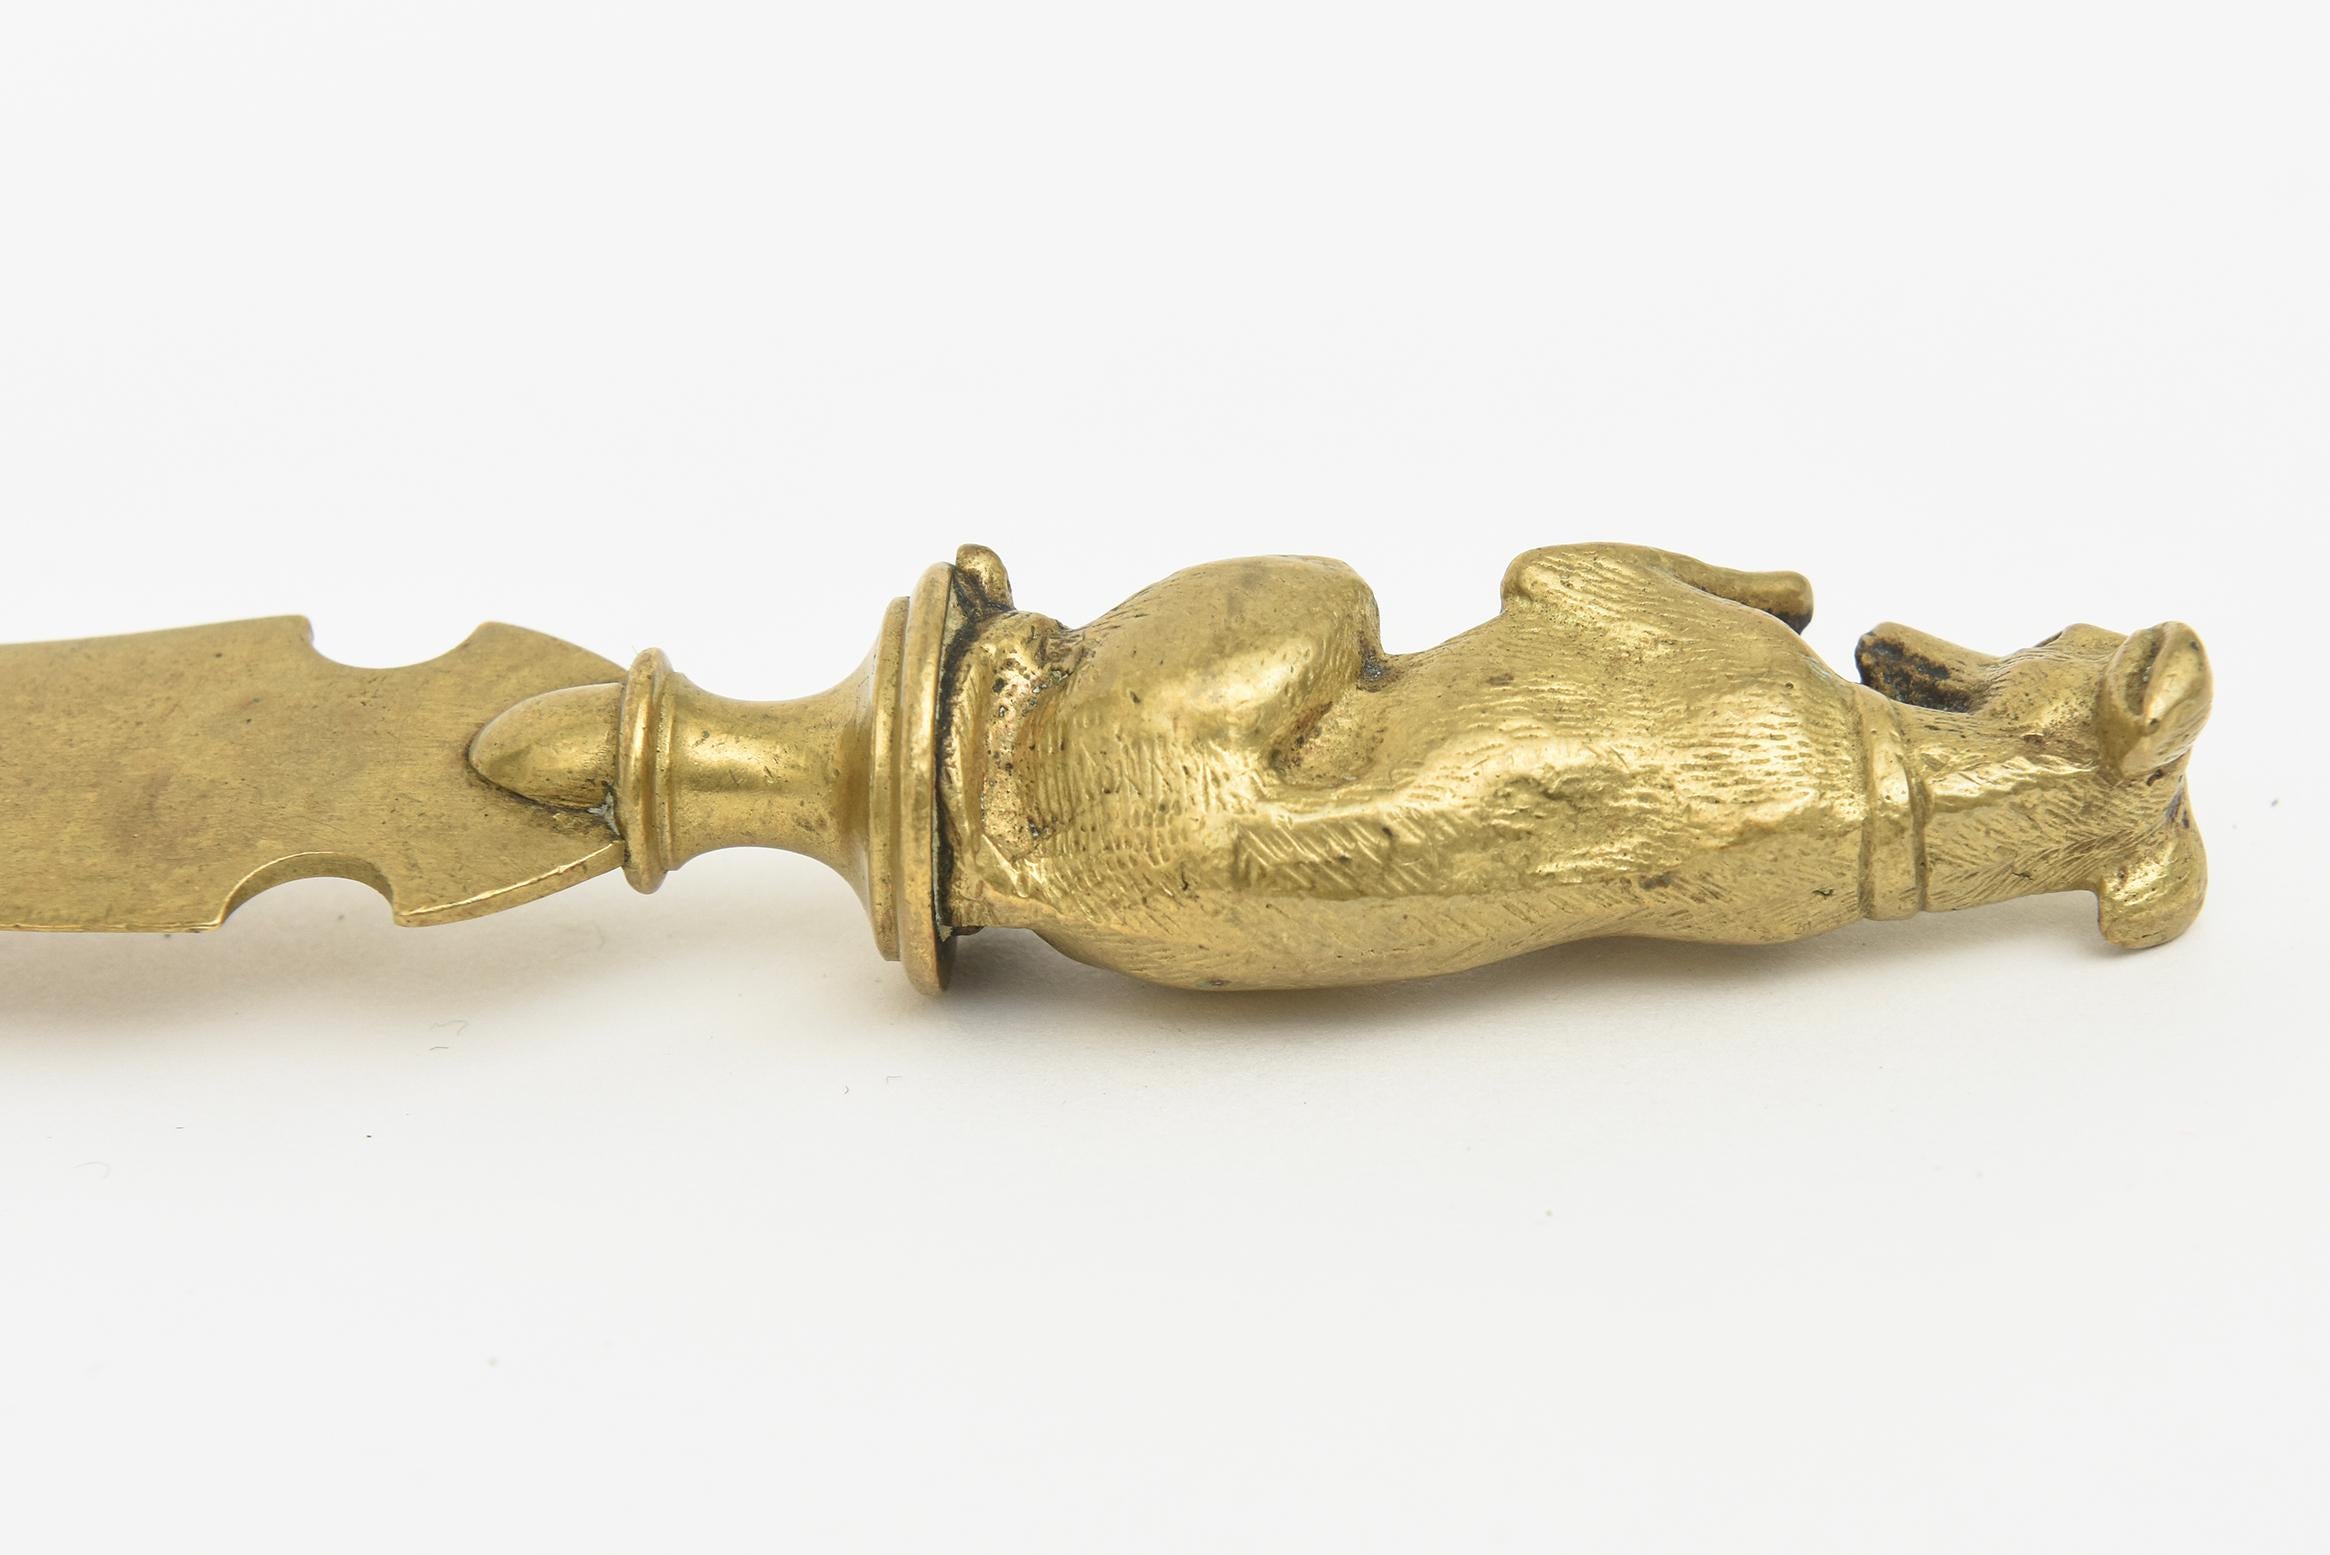 Vintage Brass Dachshund Dog Letter Opener Desk Accessory In Good Condition For Sale In North Miami, FL